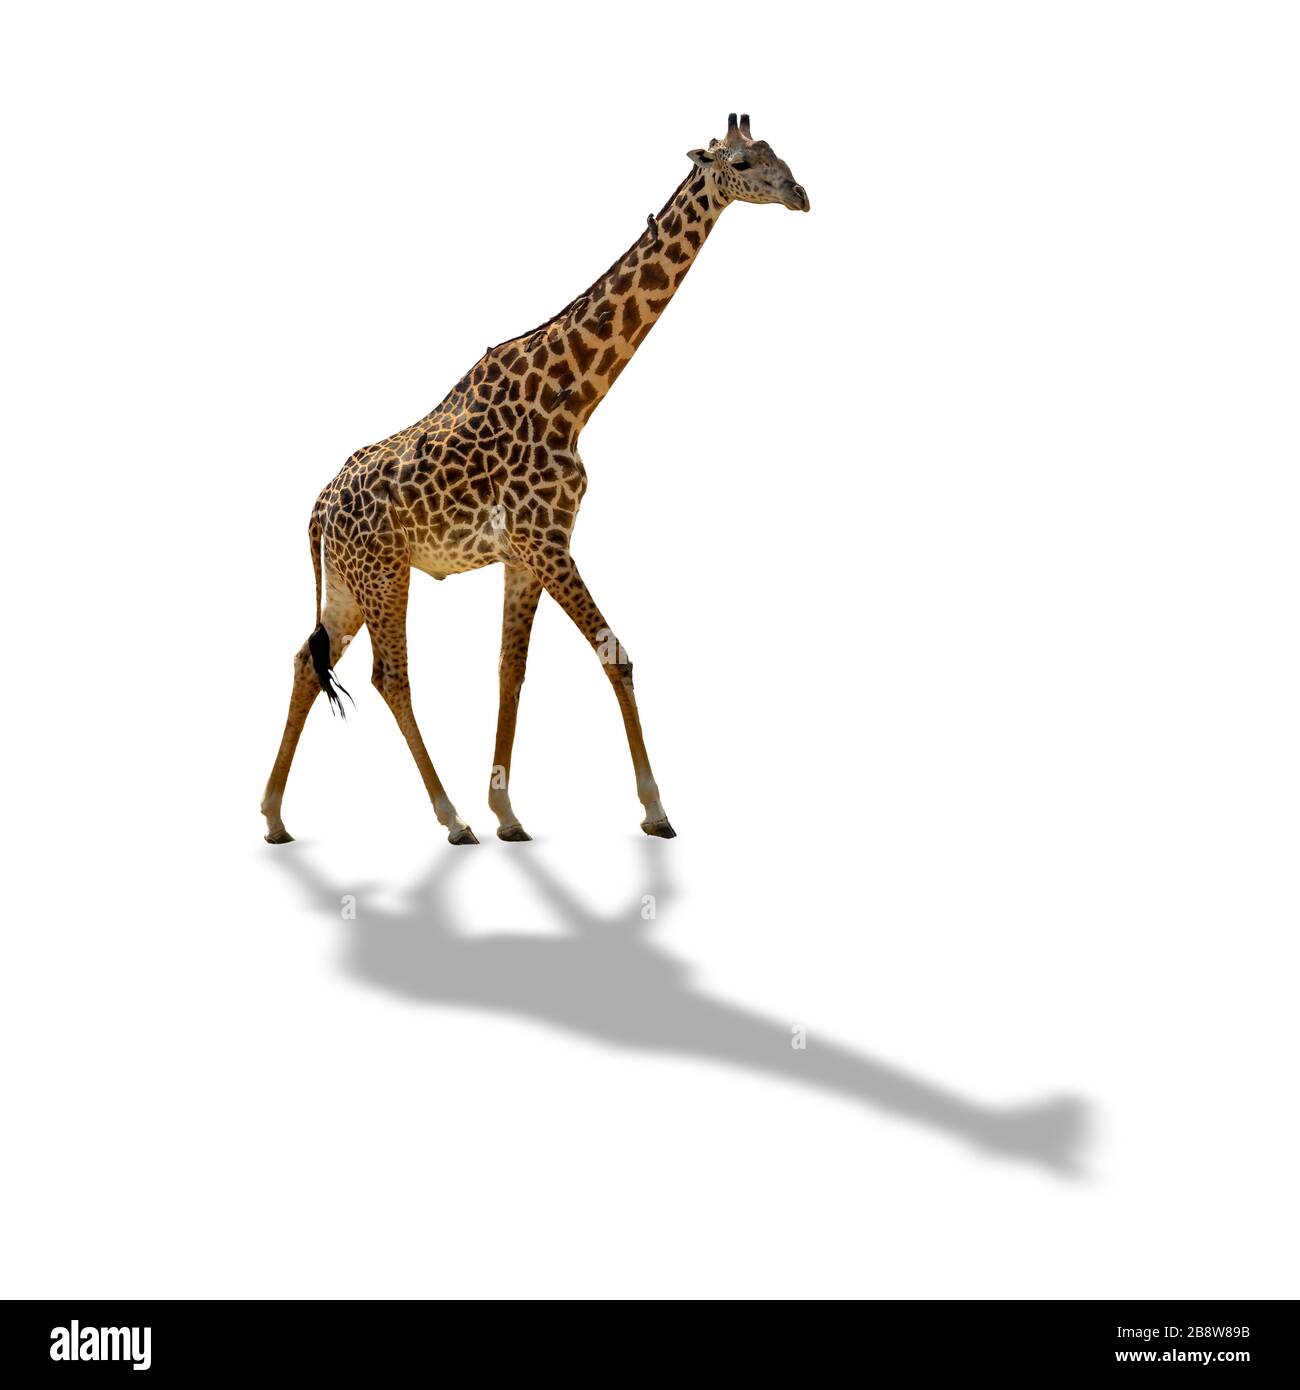 Giraffe isolated on white background with shadow Stock Photo